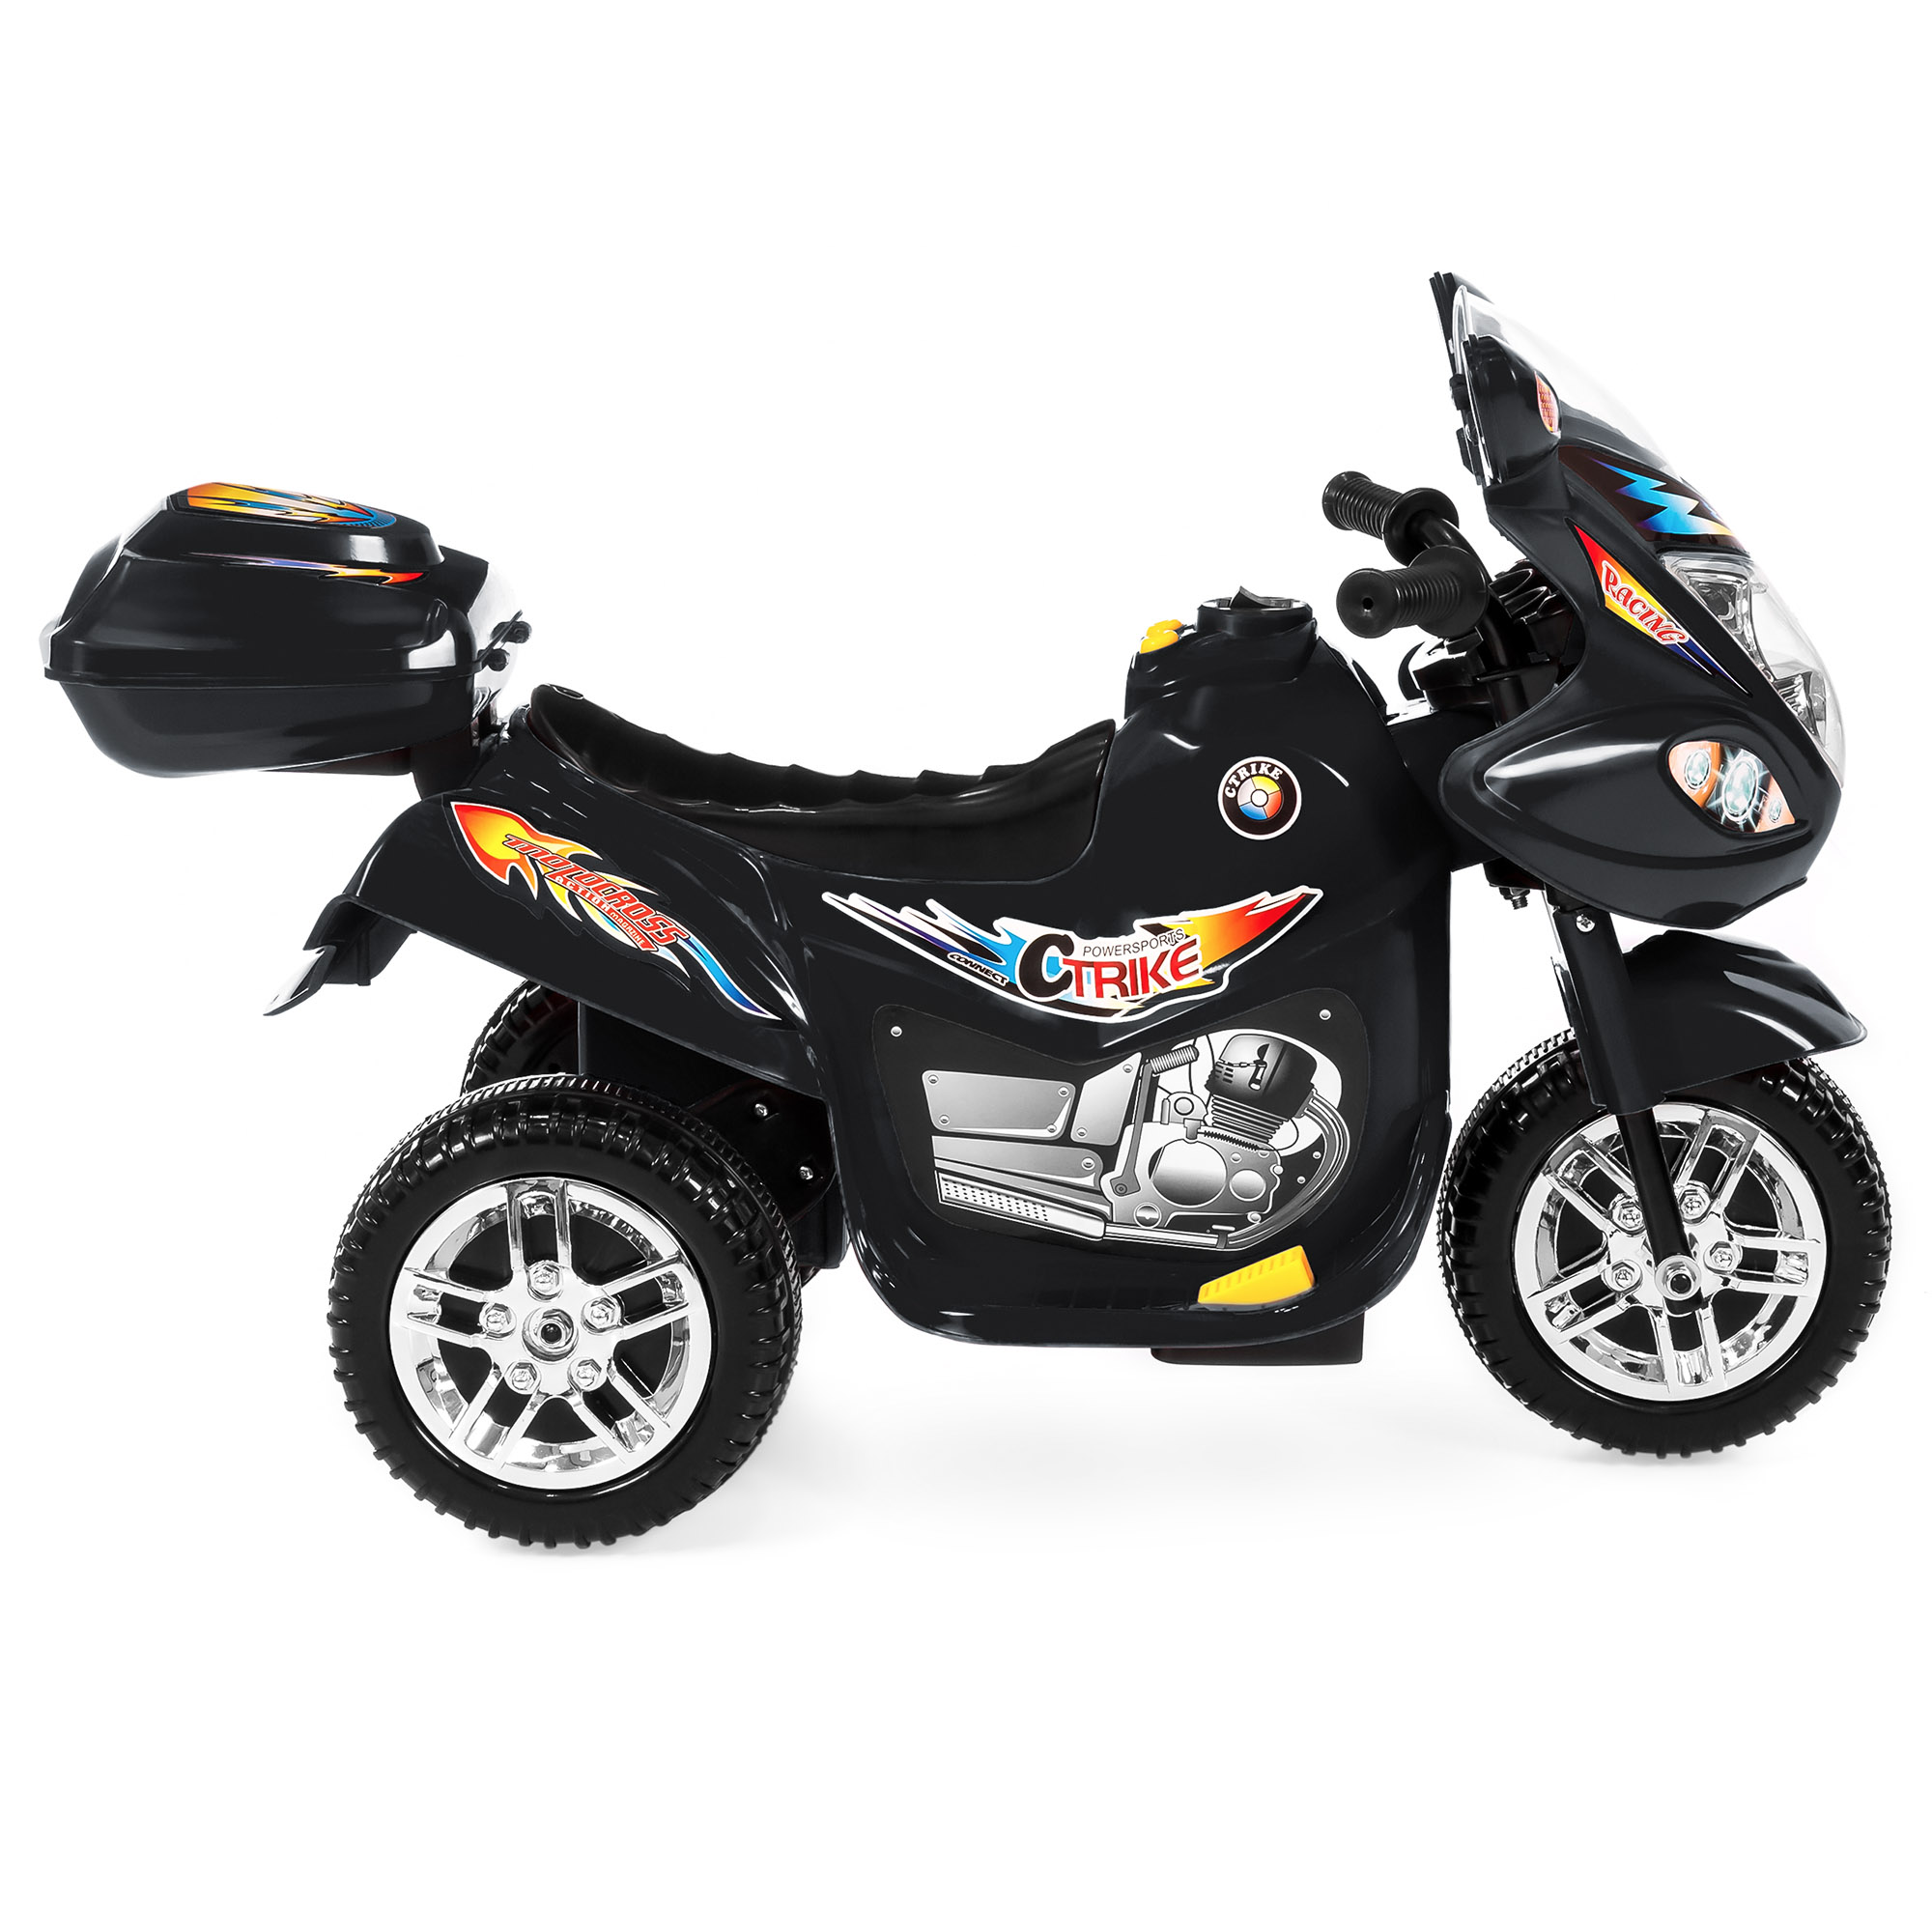 Best Choice Products 6V Kids Battery Powered 3-Wheel Motorcycle Ride On Toy w/ LED Lights, Music, Horn, Storage - Black - image 3 of 6